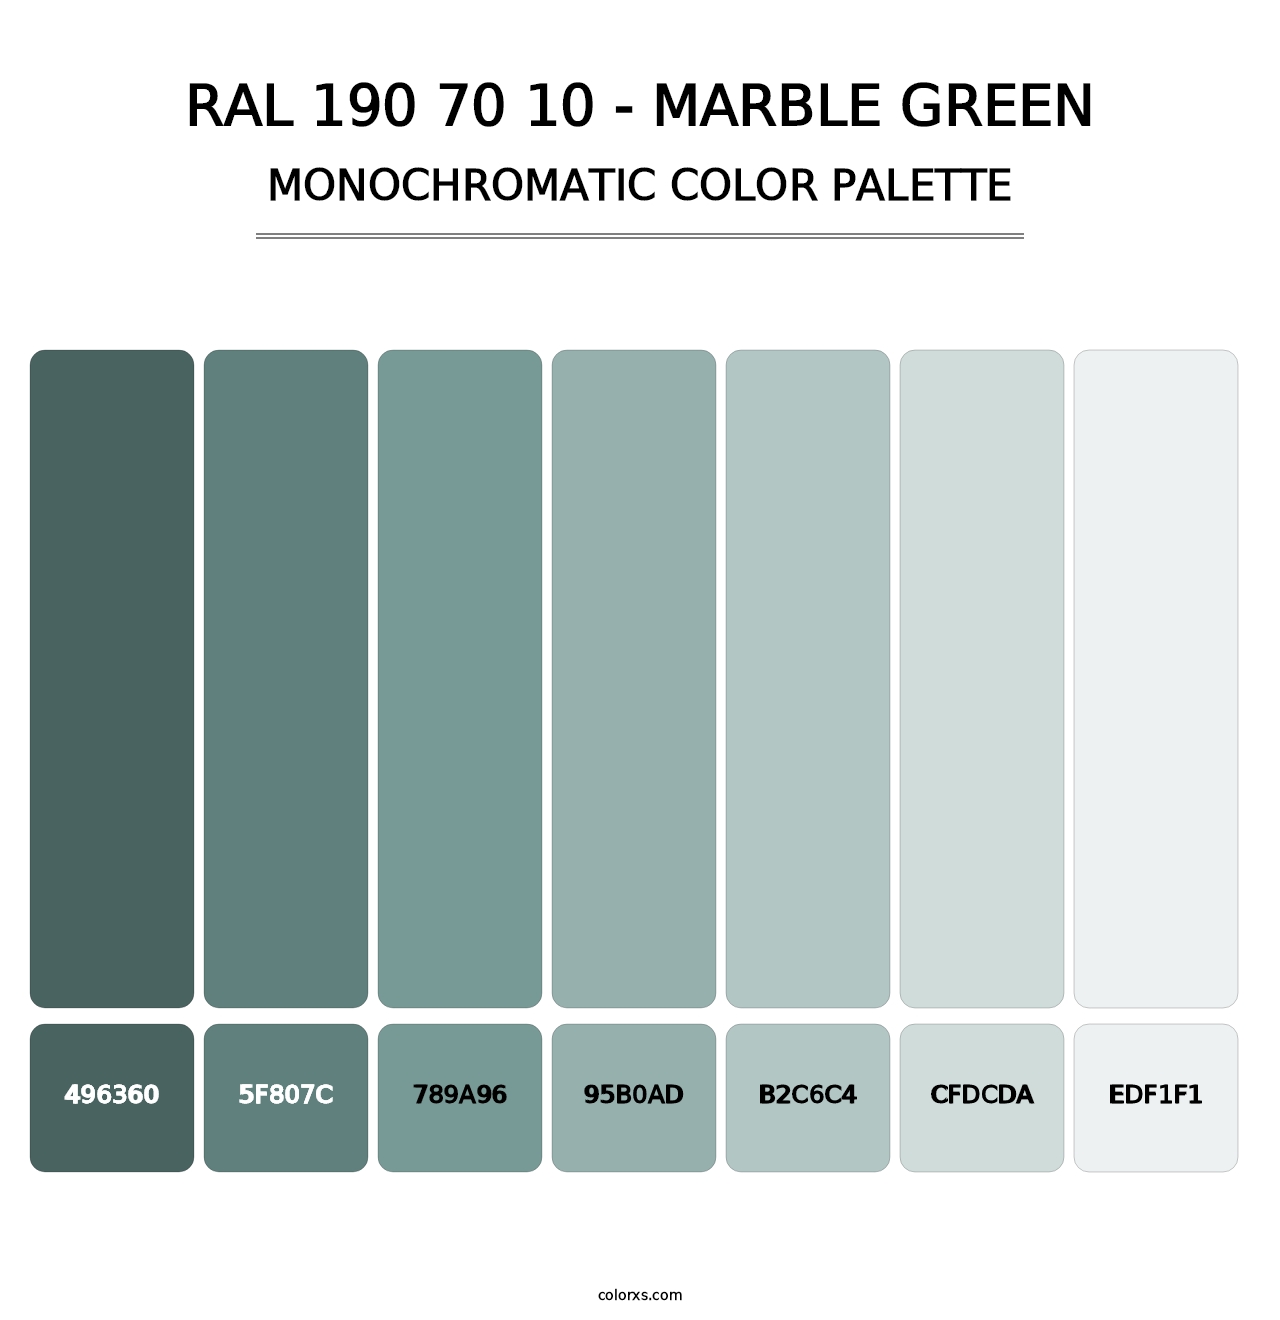 RAL 190 70 10 - Marble Green - Monochromatic Color Palette